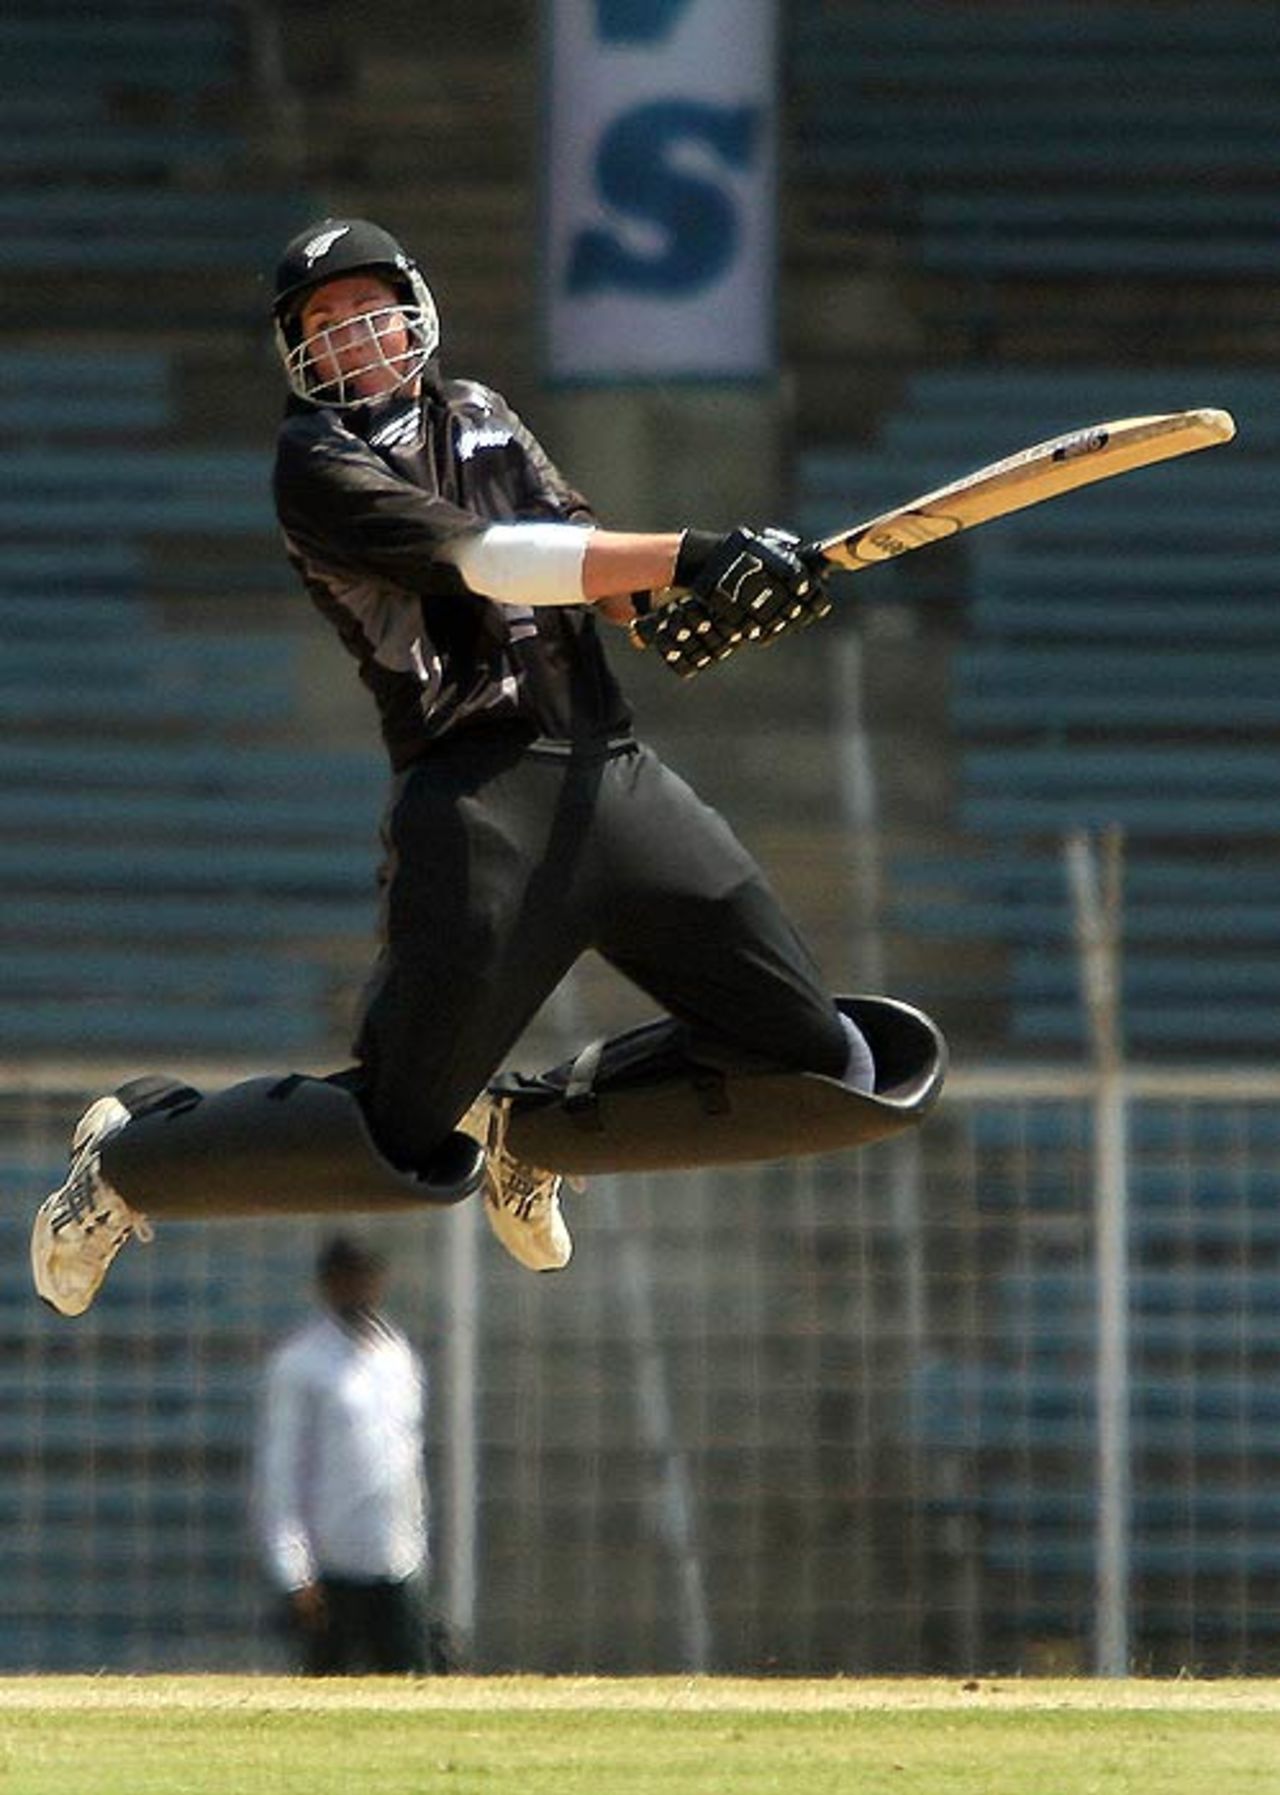 Nicola Browne forces one to the off side during the final, Australia v New Zealand, Final, Quadrangular Series, Chennai, March 5, 2007